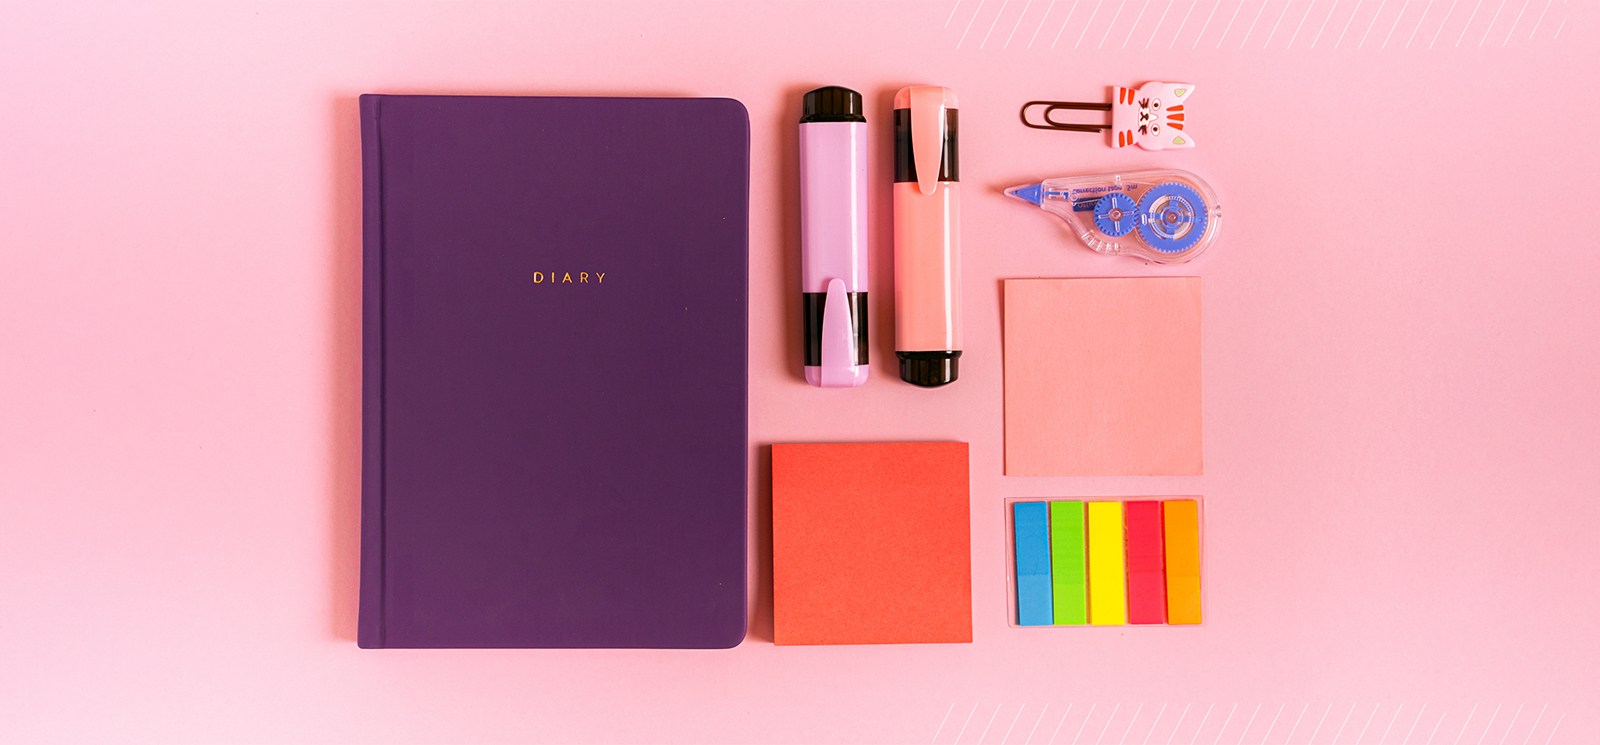 Photo of a diary and various office supplies